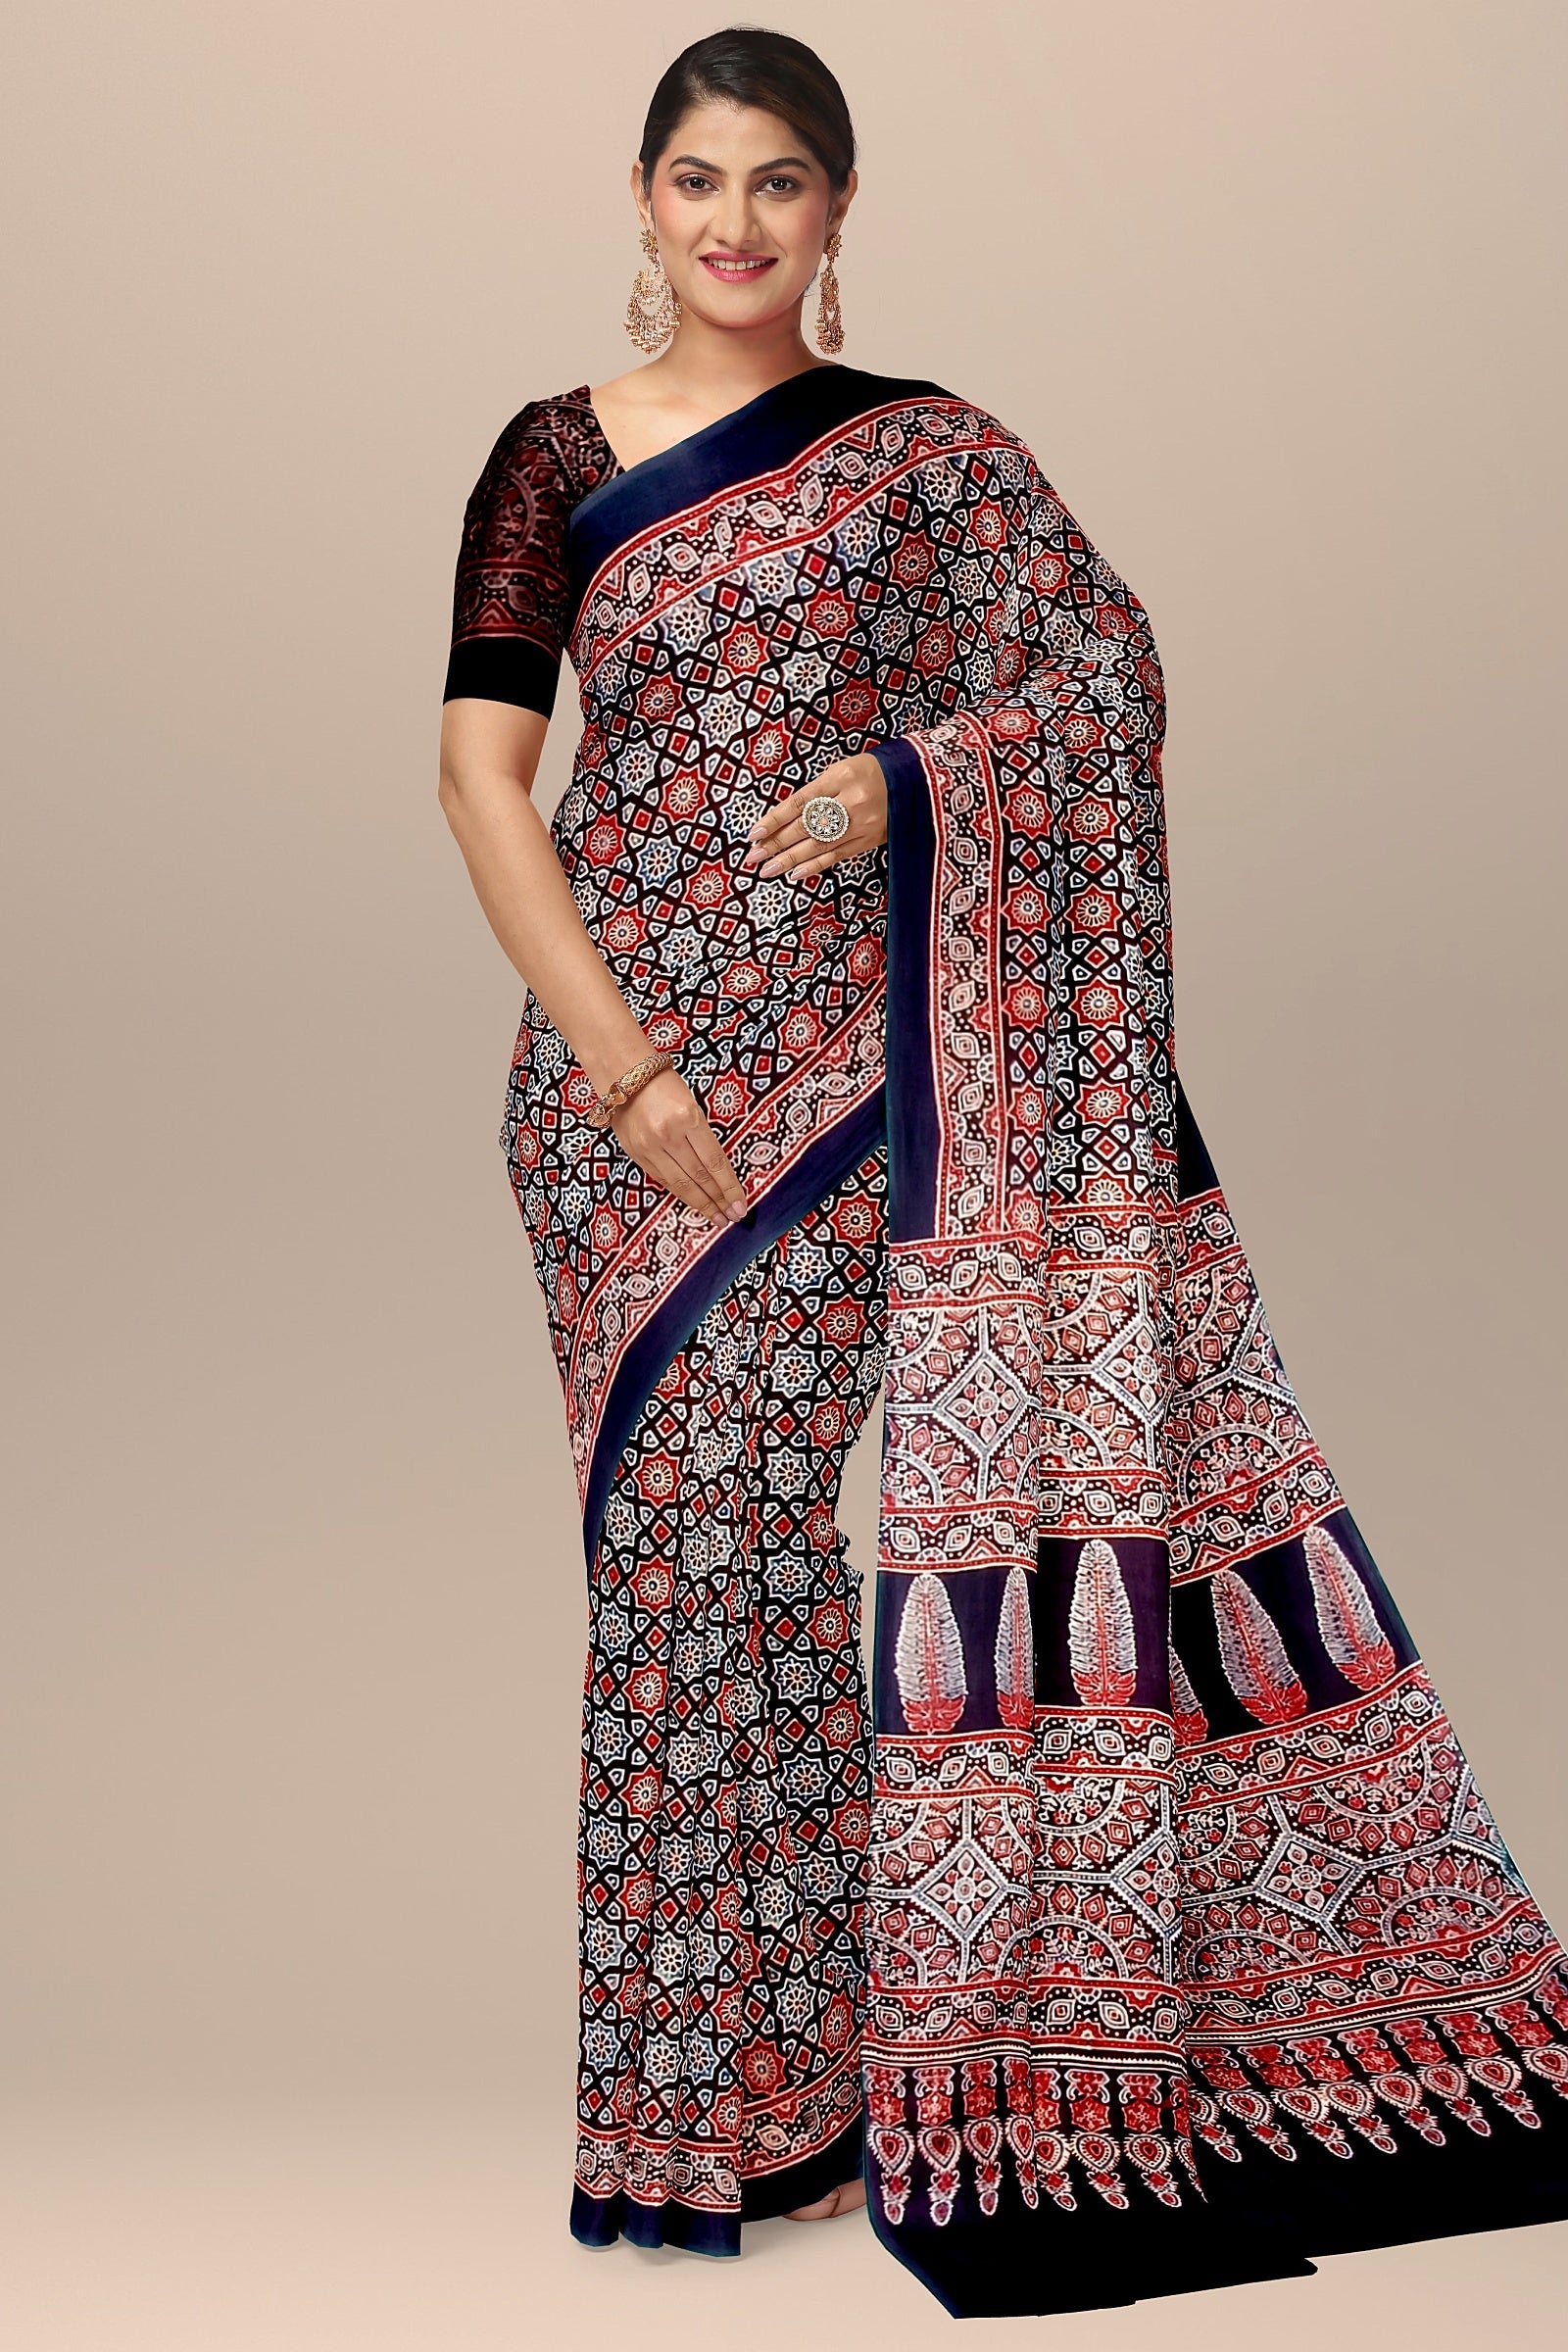 Traditional Ajrakh Hand Block Printed Black Color Modal Silk Saree with Blue and Red Floral and Geometrical Print   SKU-BS10146 - Bhartiya Shilp